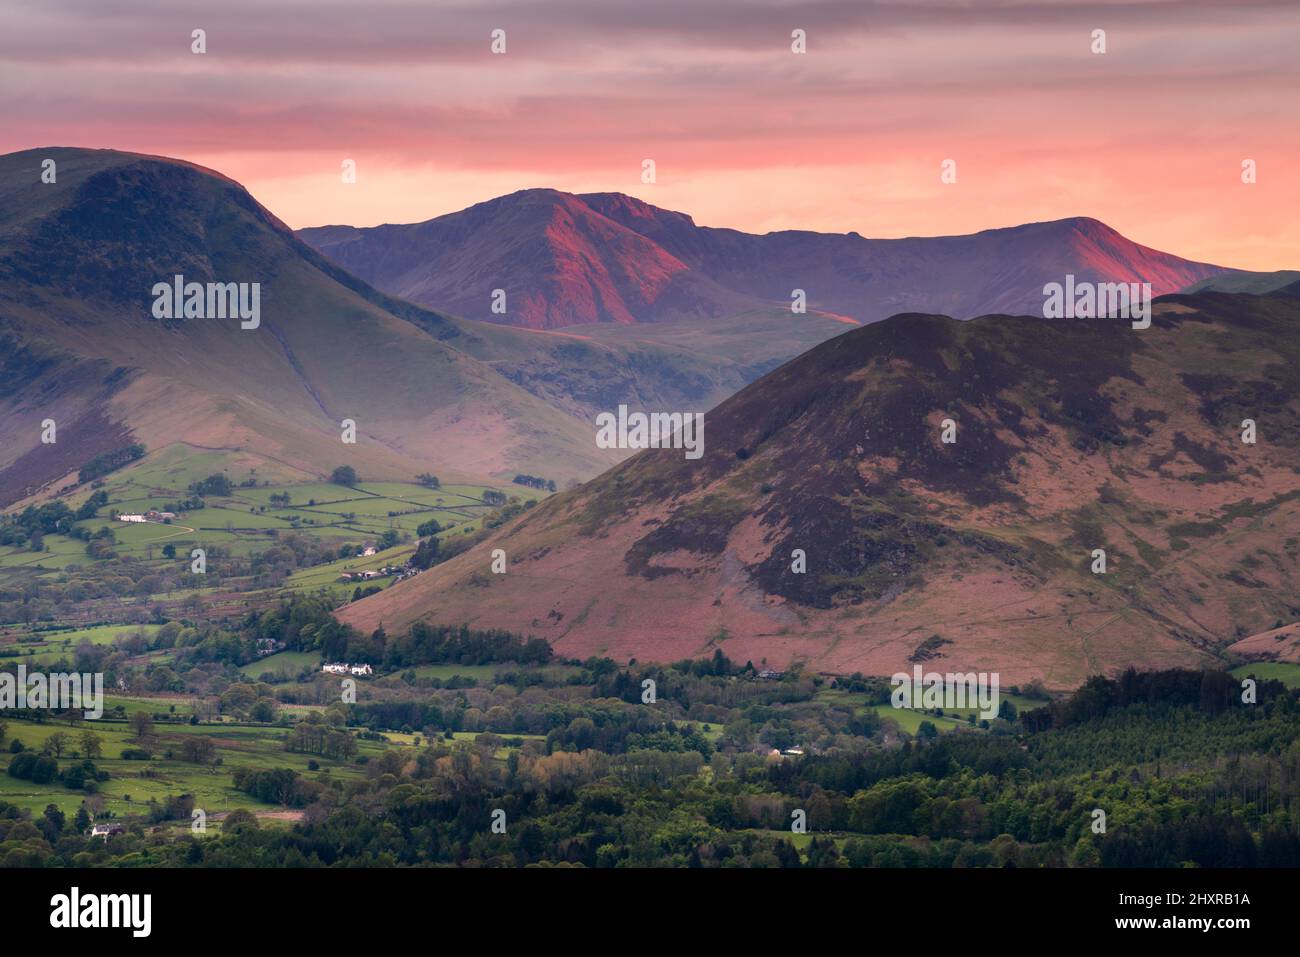 Scenic views of Lake District mountains with beautiful sunset in sky. British mountain landscape with dramatic evening light. Keswick, Lakeland, UK. Stock Photo